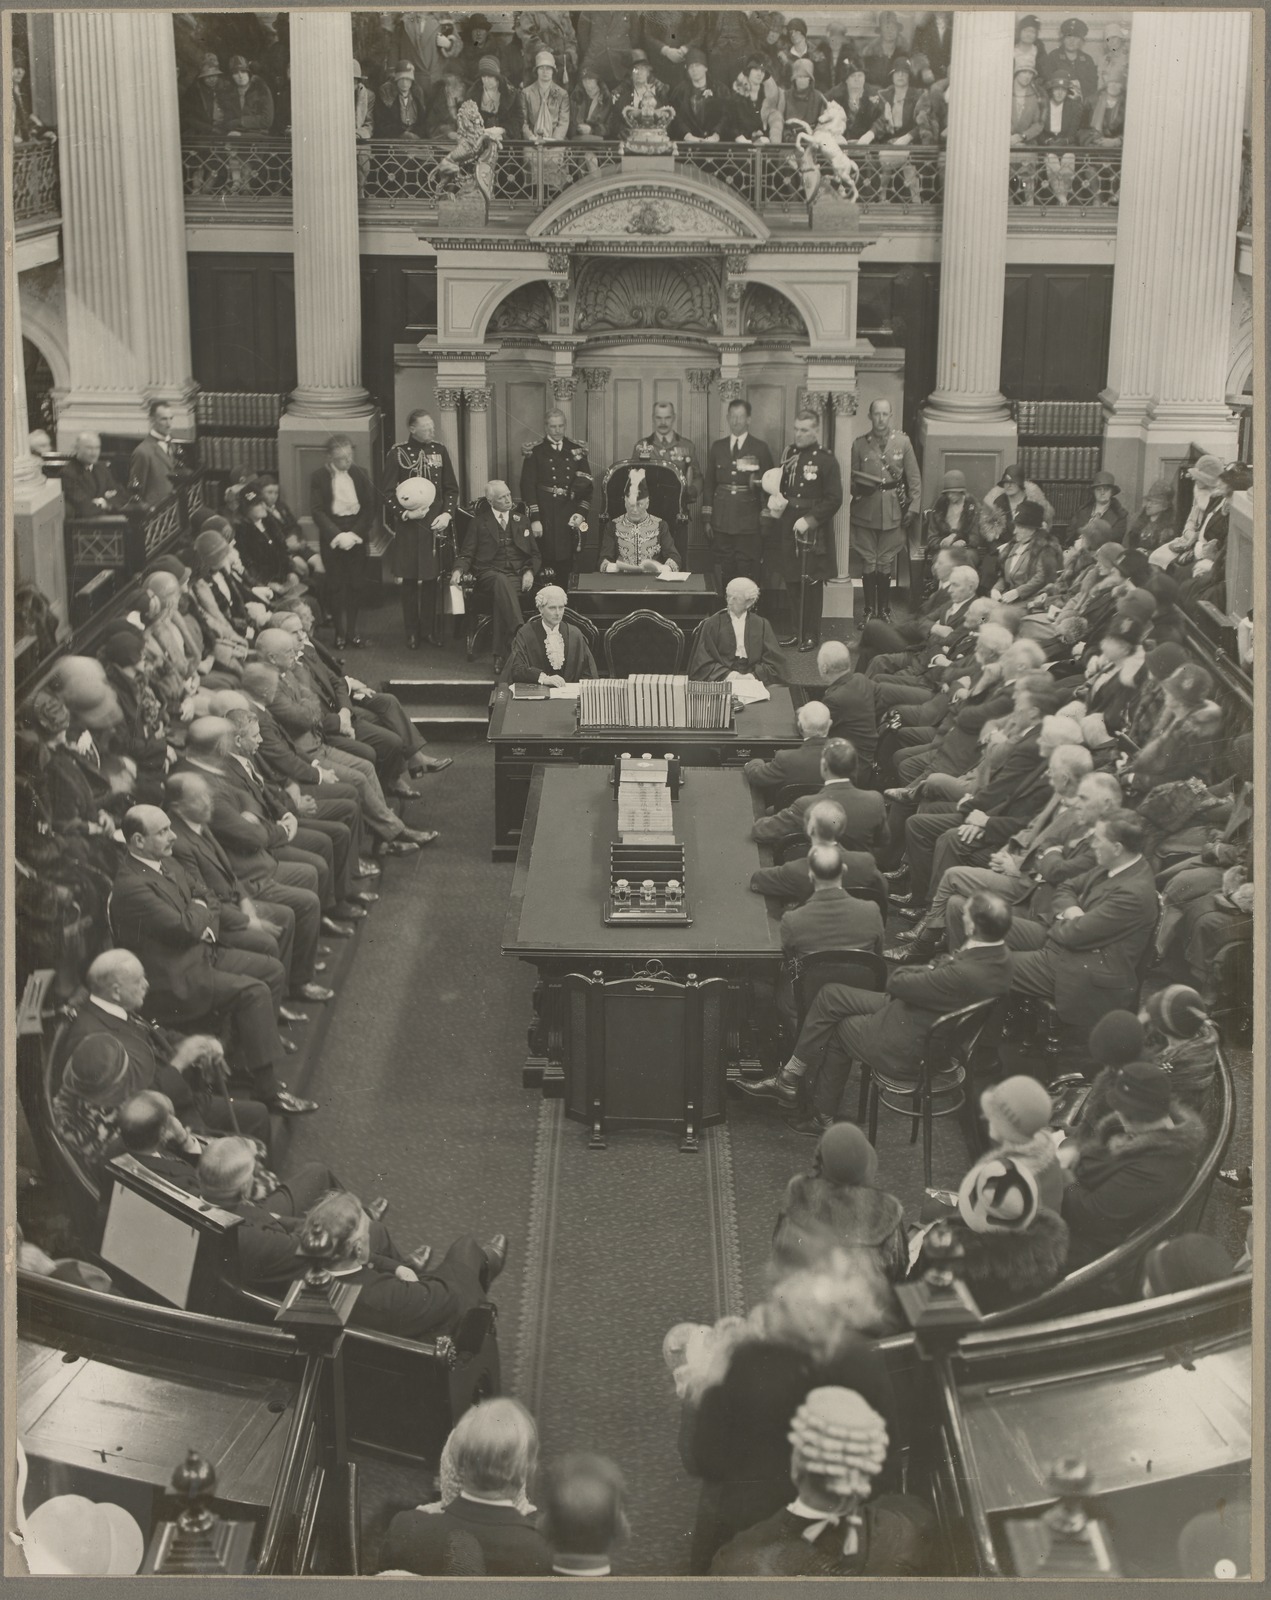 The opening of the Victorian Parliament by the Hon. Sir William Irvine, Lieutenant-Governor of Victoria, on 3rd July 1929. Source: State Library of Victoria.